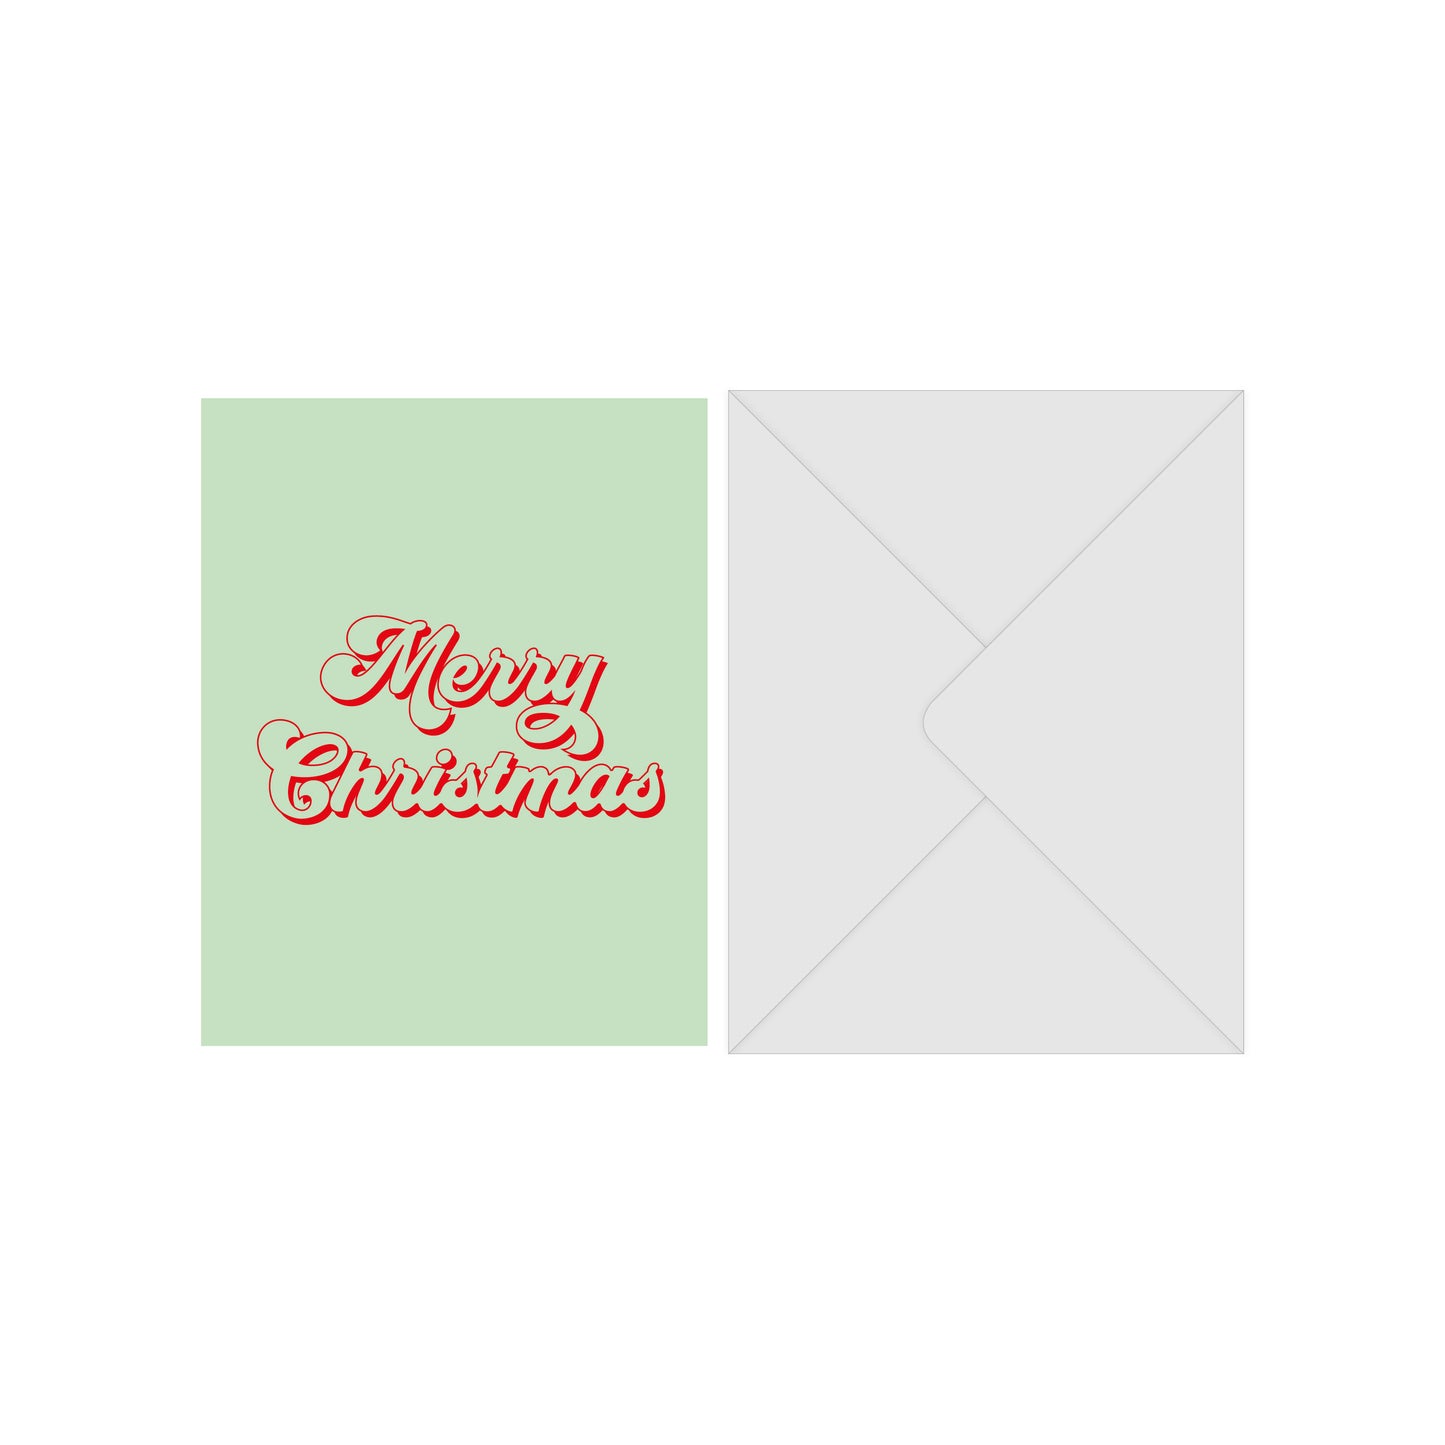 Greeting card, "Merry Christmas" with envelope